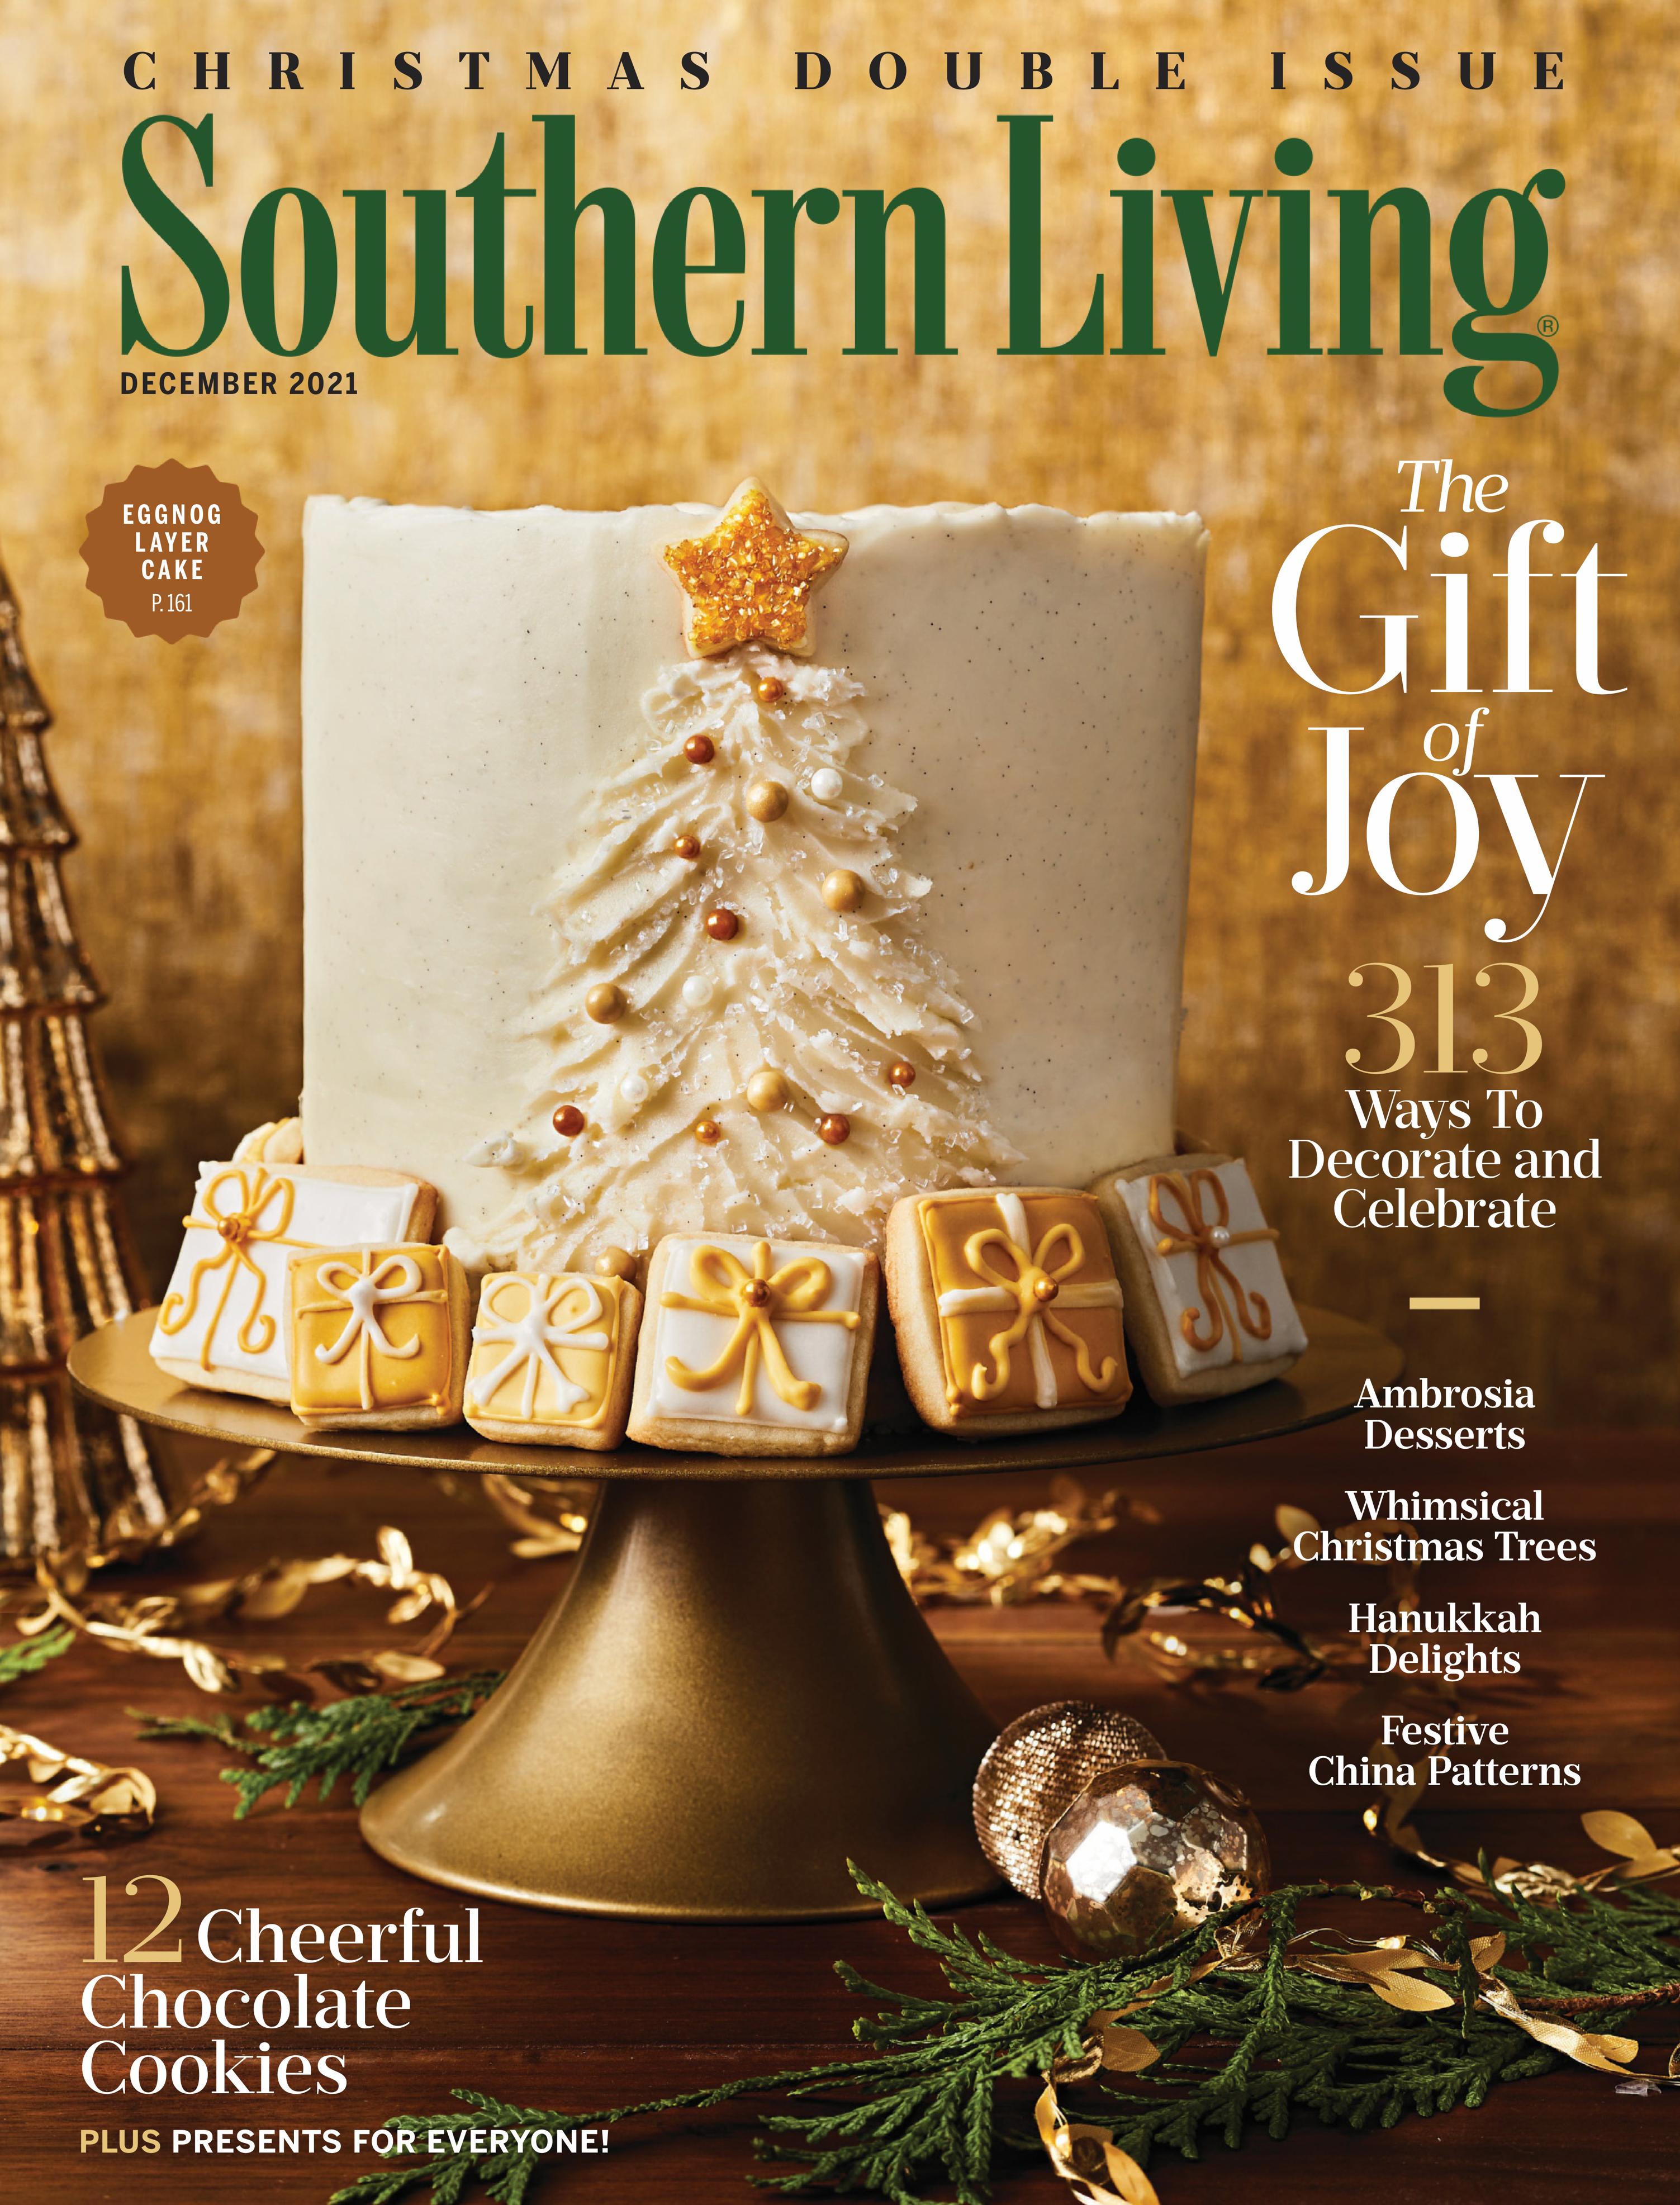 Southern Living December 2021 SoftArchive